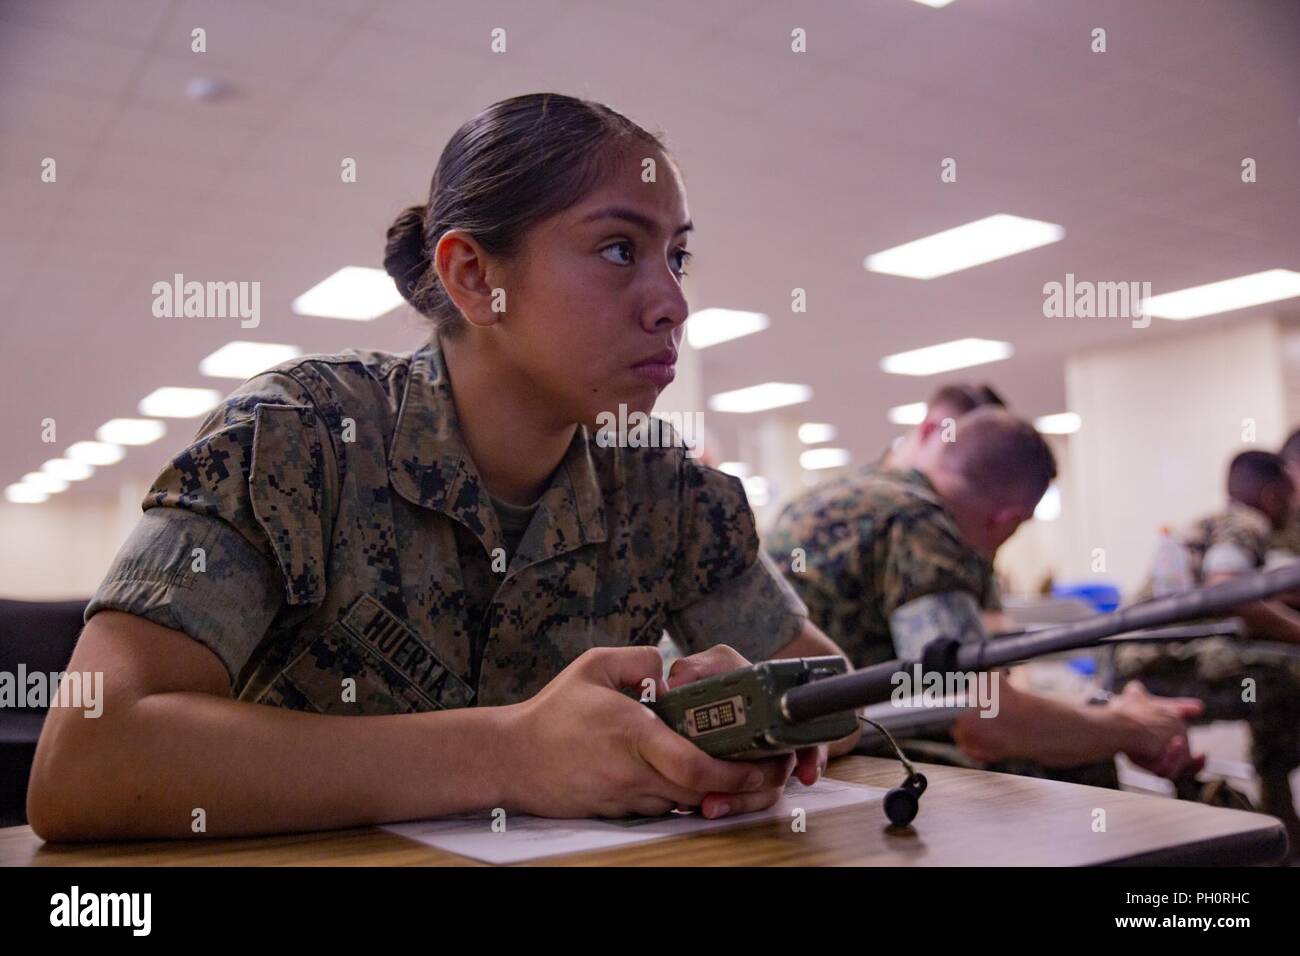 Lance Cpl. Roxanna Huerta, a food service specialist with Food Service Company, Headquarters Regiment, 3rd Marine Logistics Group, practices working on an AN-PRC 152 radio during the Battle Skills Test June 20, 2018, at Camp Kinser, Okinawa, Japan. During the BST, Marines are tested on different skills such as operating a radio, applying tourniquets and handling detainees. Huerta is a native of San Bernardino, California. Stock Photo